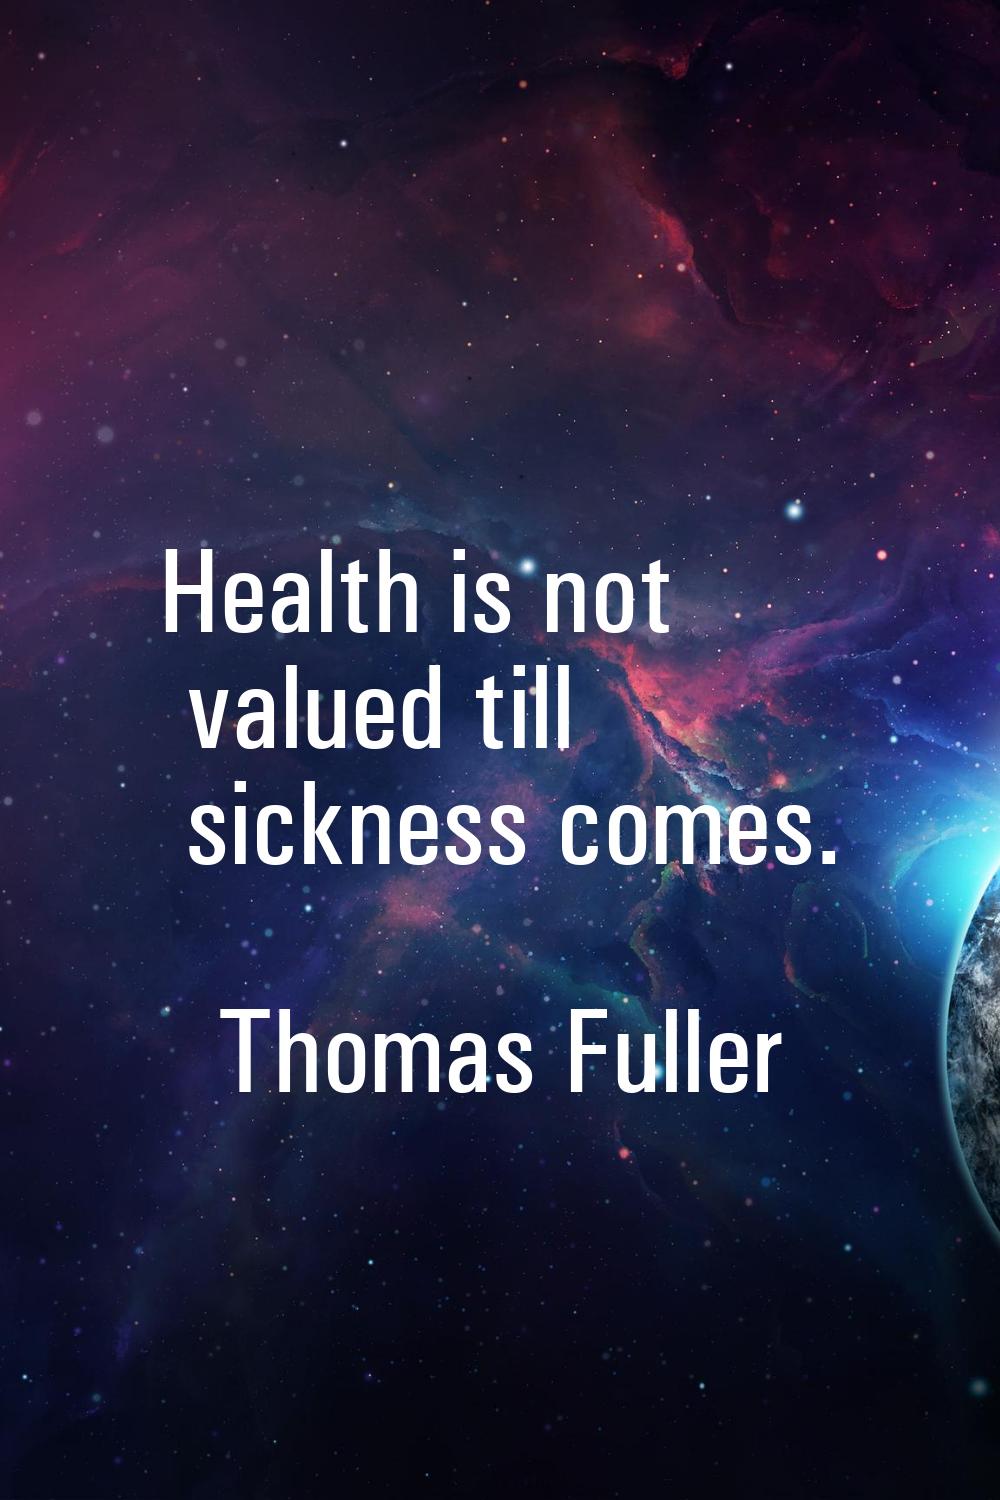 Health is not valued till sickness comes.